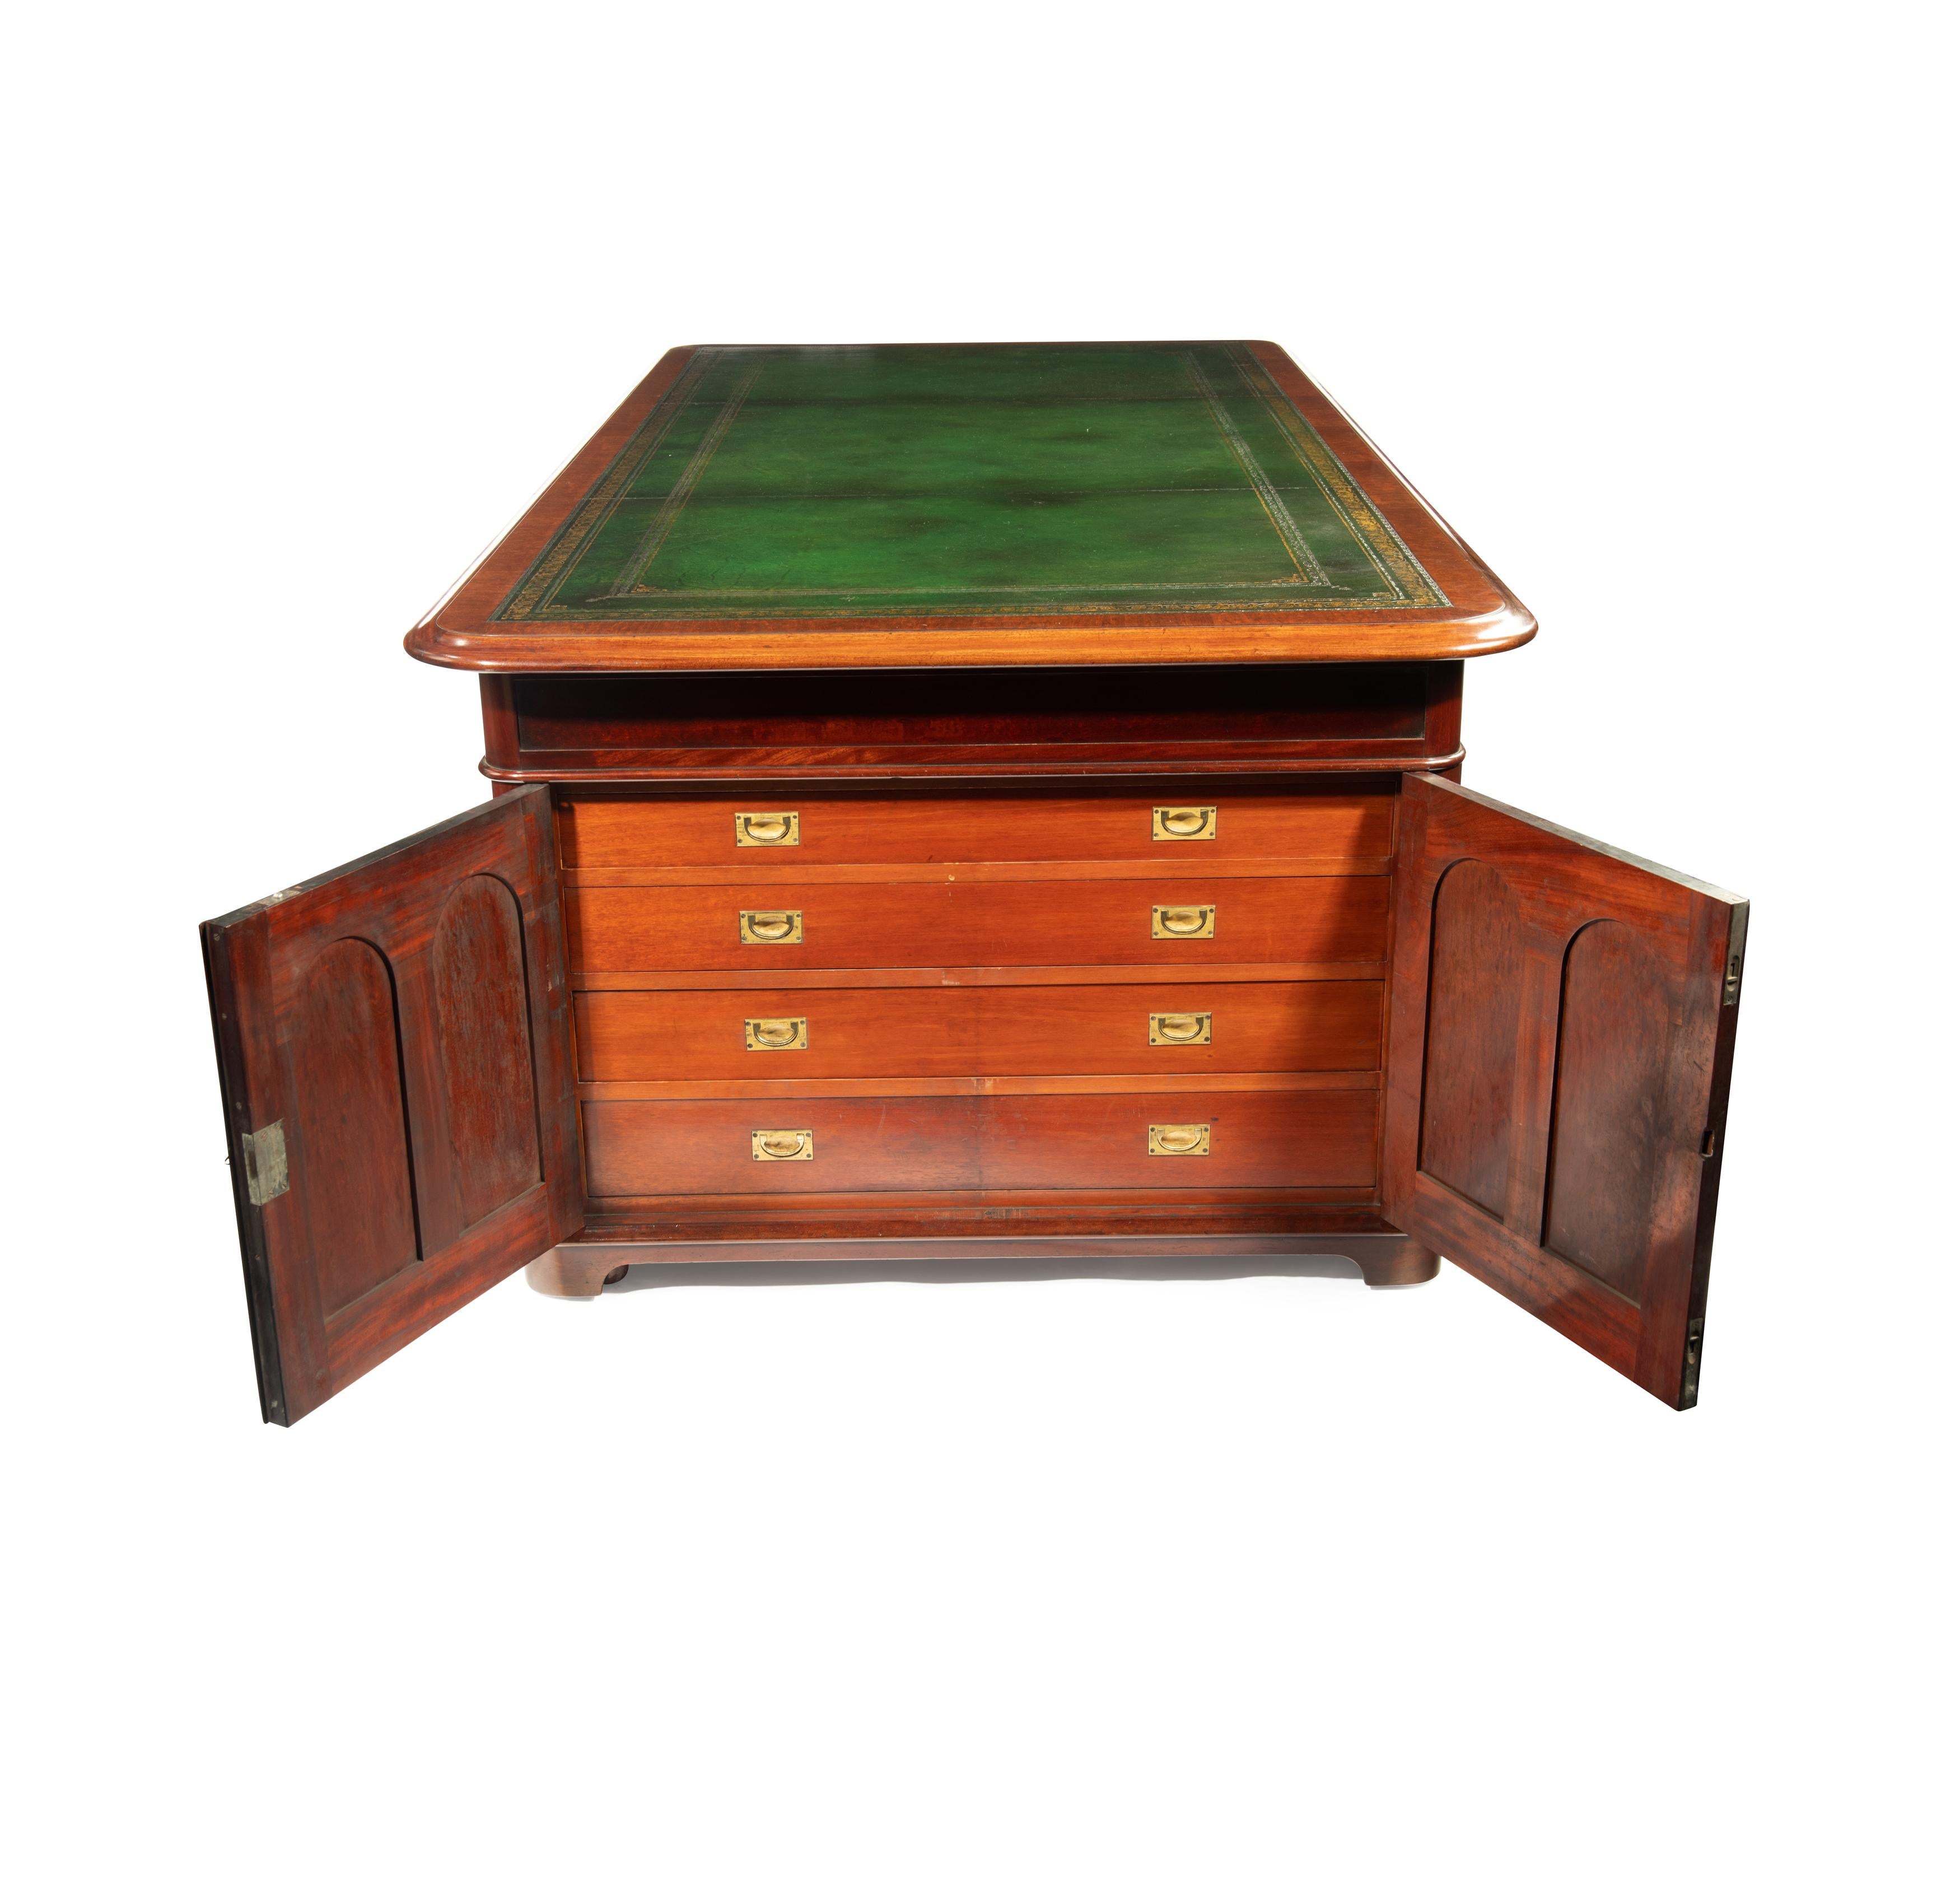 A large and imposing Victorian mahogany partners’ desk, the rectangular top inset with replaced green leather within cross-banding and a moulded edge, the frieze with three drawers which can be opened from either side and thus extend across the full